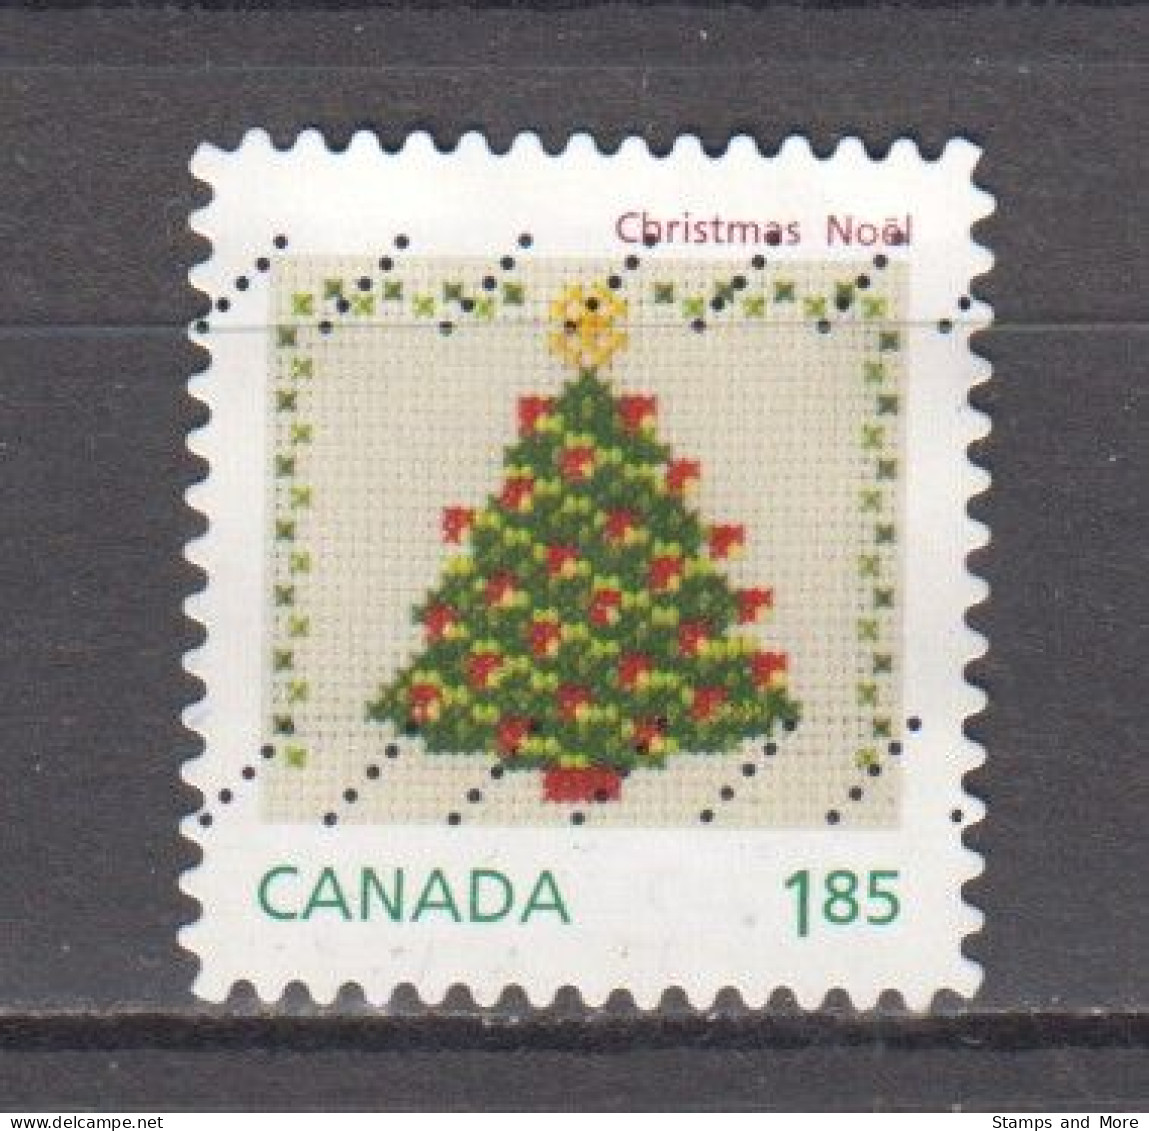 Canada 2013 Mi 3060 Canceled - Used Stamps